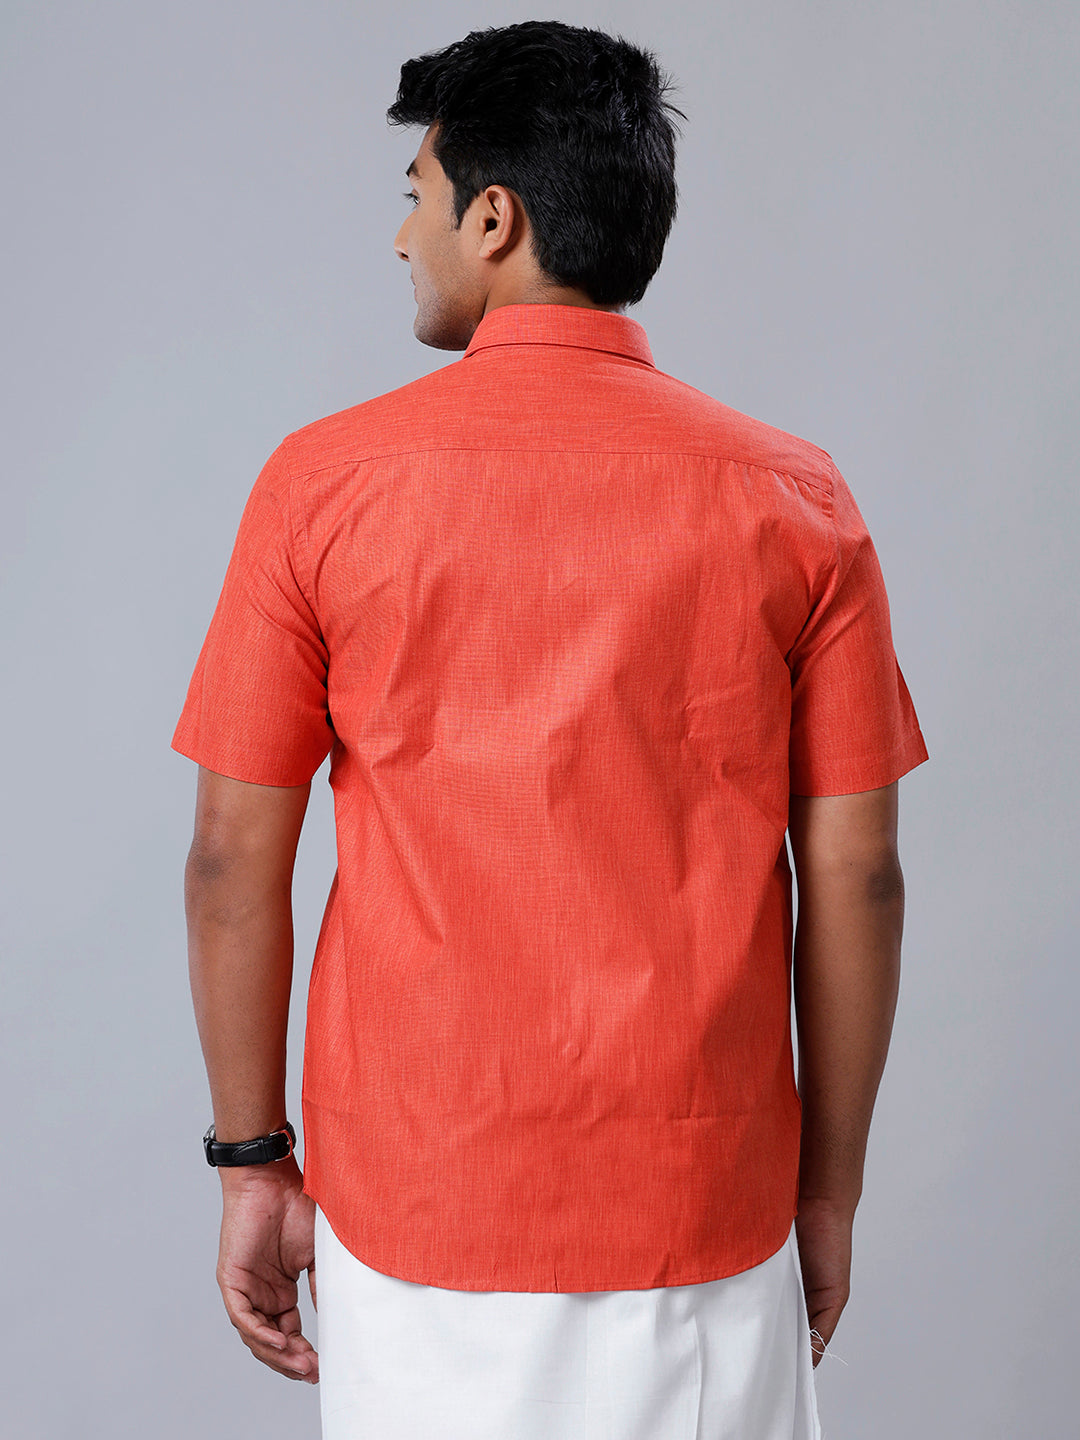 Mens Formal Shirt Half Sleeves Red T40 TP1-Back view